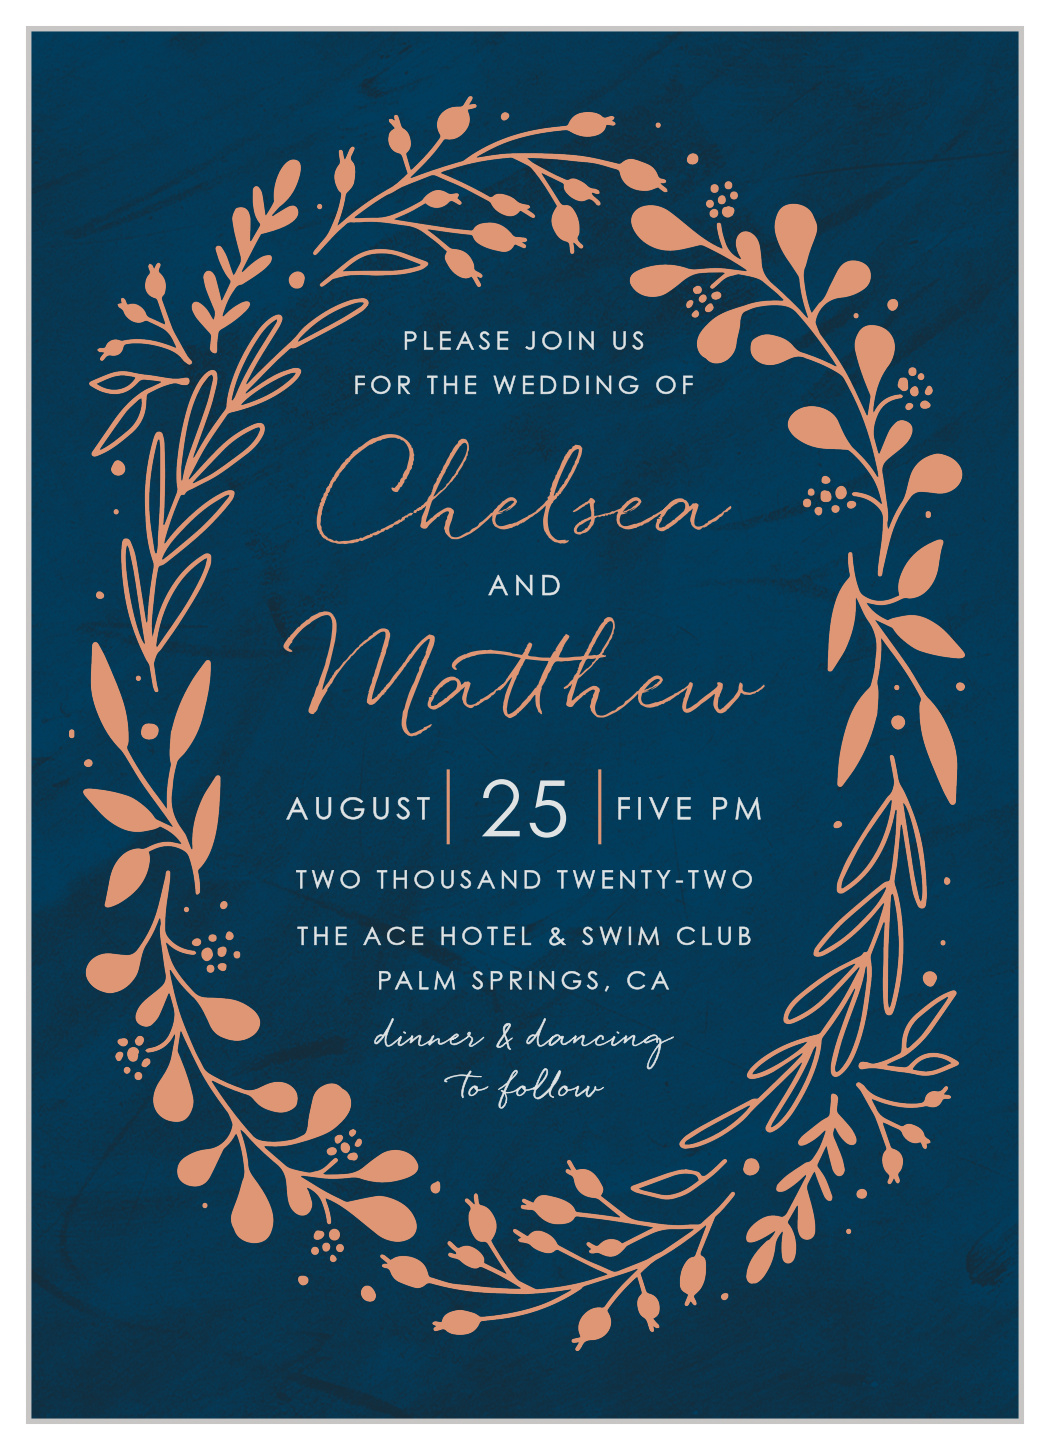 Once Upon a Time Wedding Invitations